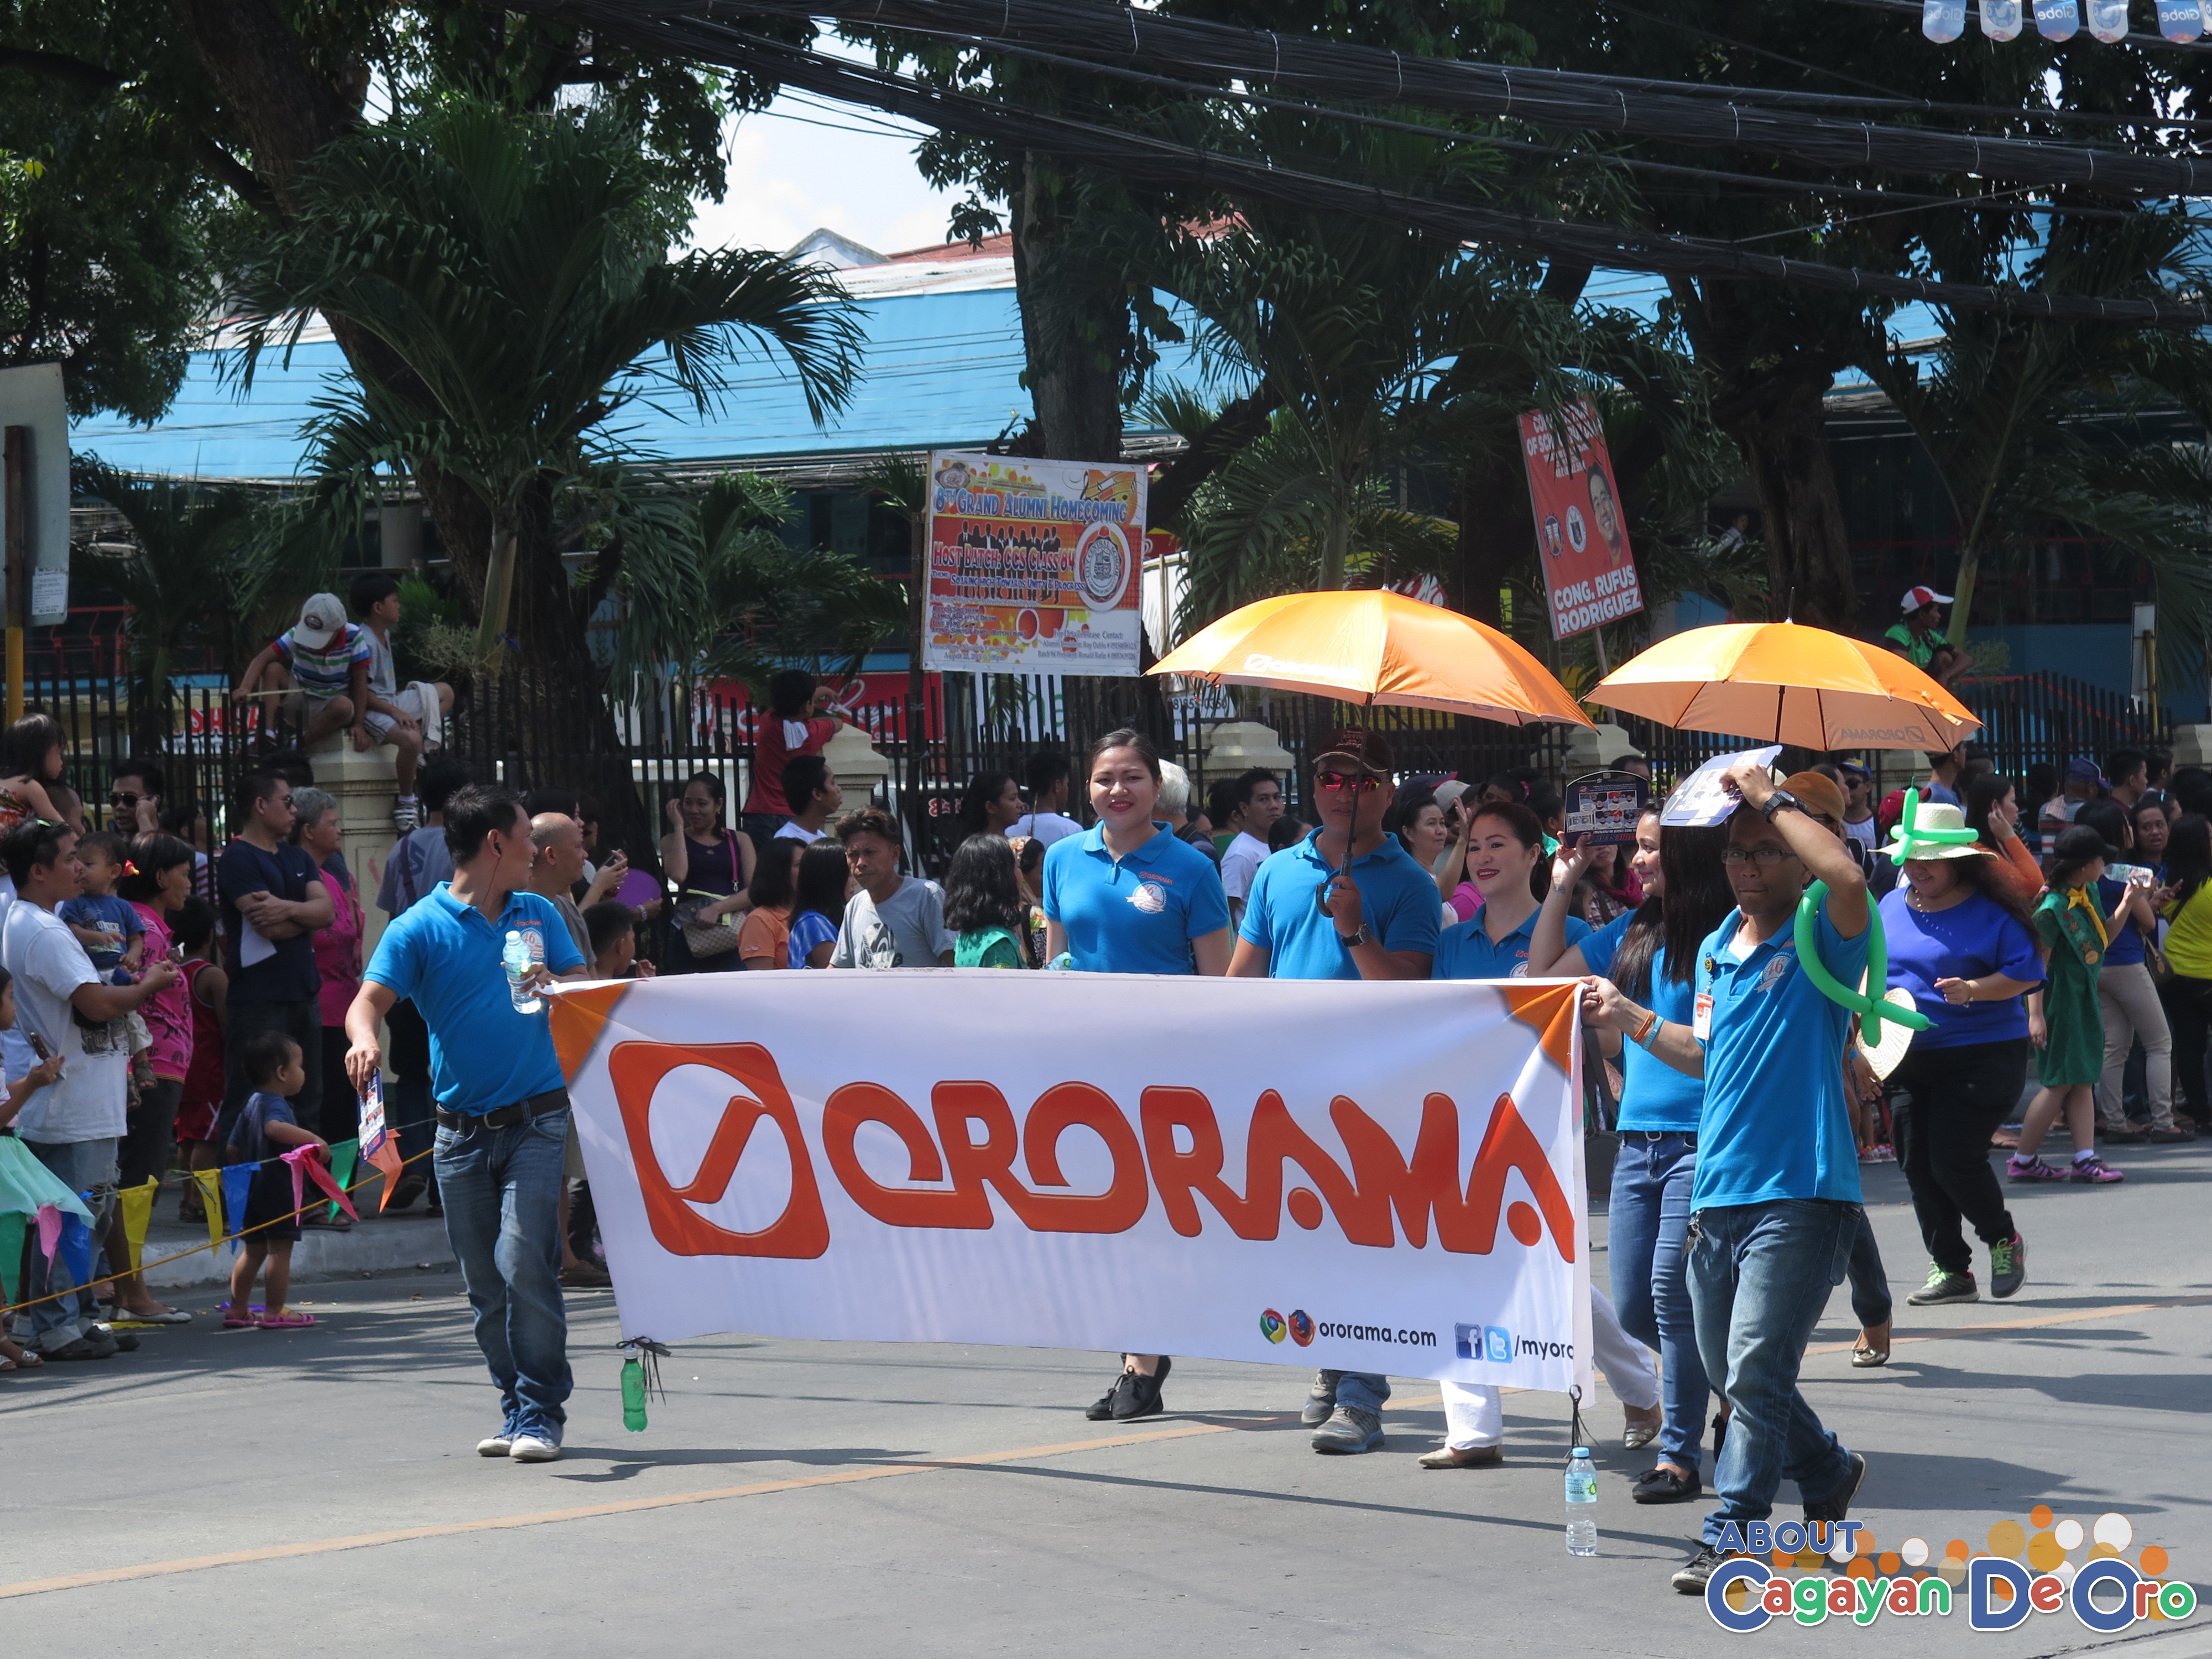 Ororama at Cagayan de Oro The Higalas Parade of Floats and Icons 2015